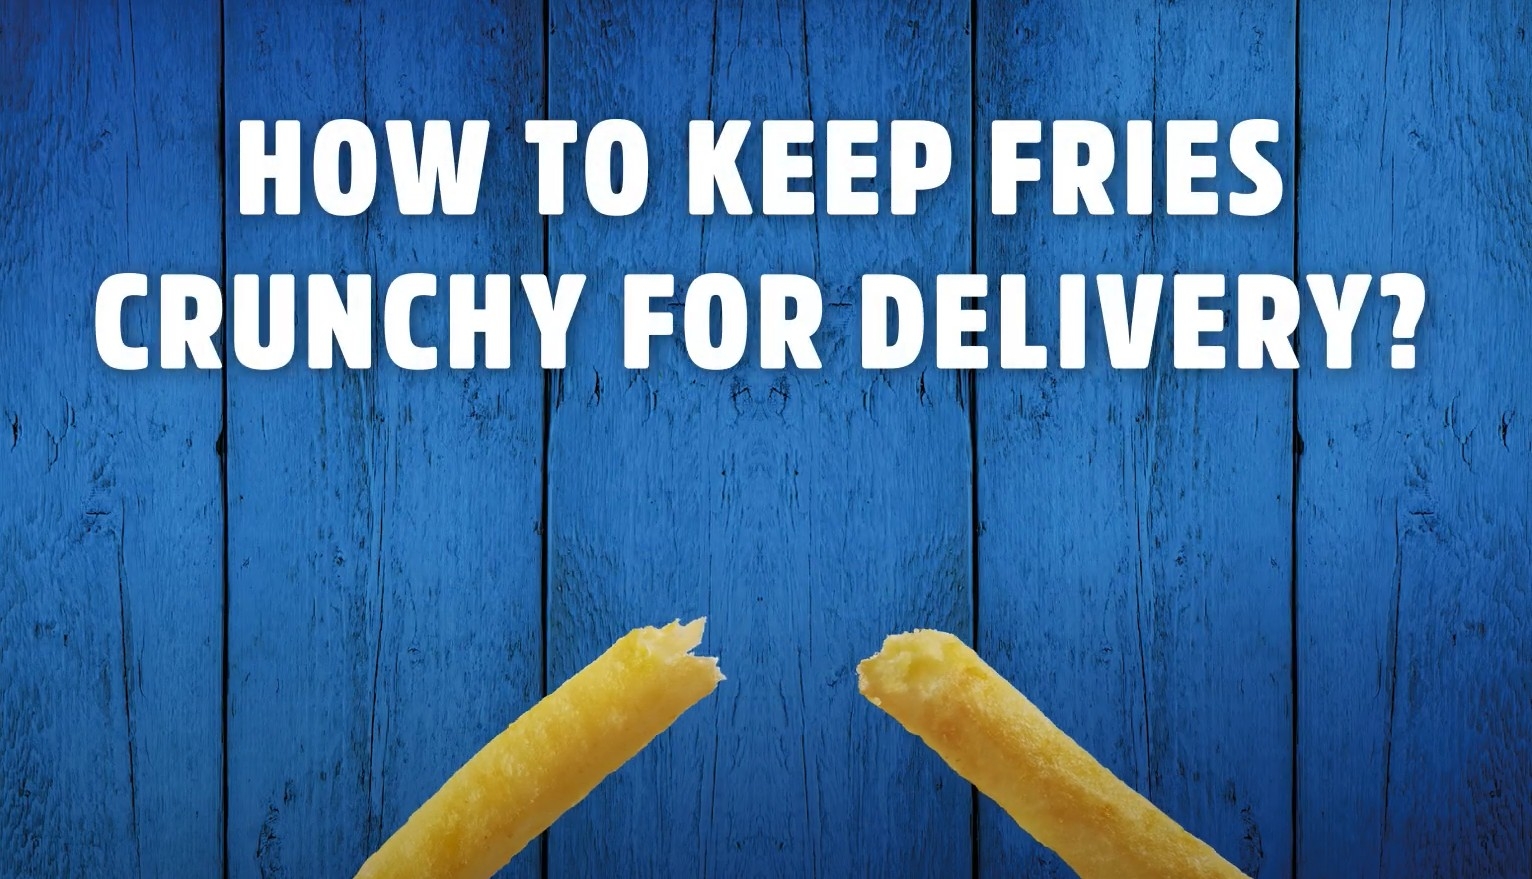 How to keep fries crunchy for delivery